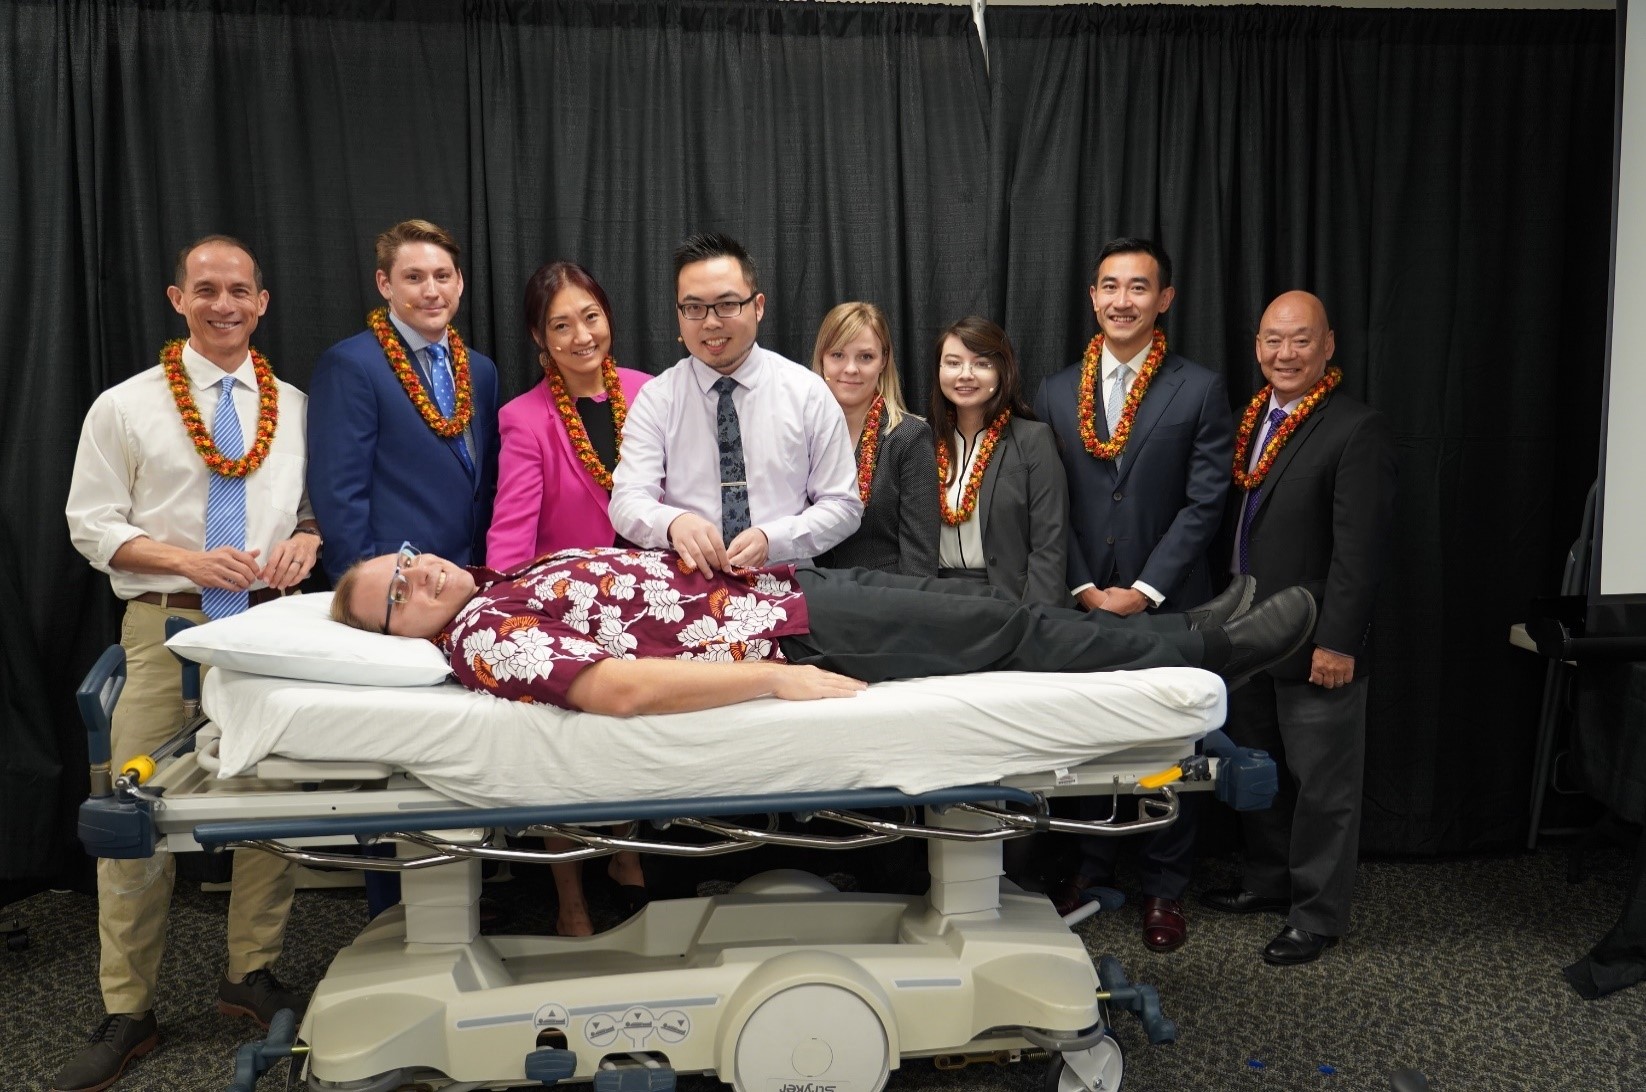 Pictured, L-R (Standing): Tarquin Collis, MD (AMD, Medical Specialties; Chief, Infectious Disease); John Neighbors, MD; Diana Kim, MD; Henry Lew, MD (Chief Resident, Inpatient); Patrycja Ashley, MD; Katharine Wong, MD;Yue “Lei” Fang, MD; Mitch Motooka, MD (Program Director). (Lying Down): Philip Verhoef, MD, PhD (Assoc Program Director).